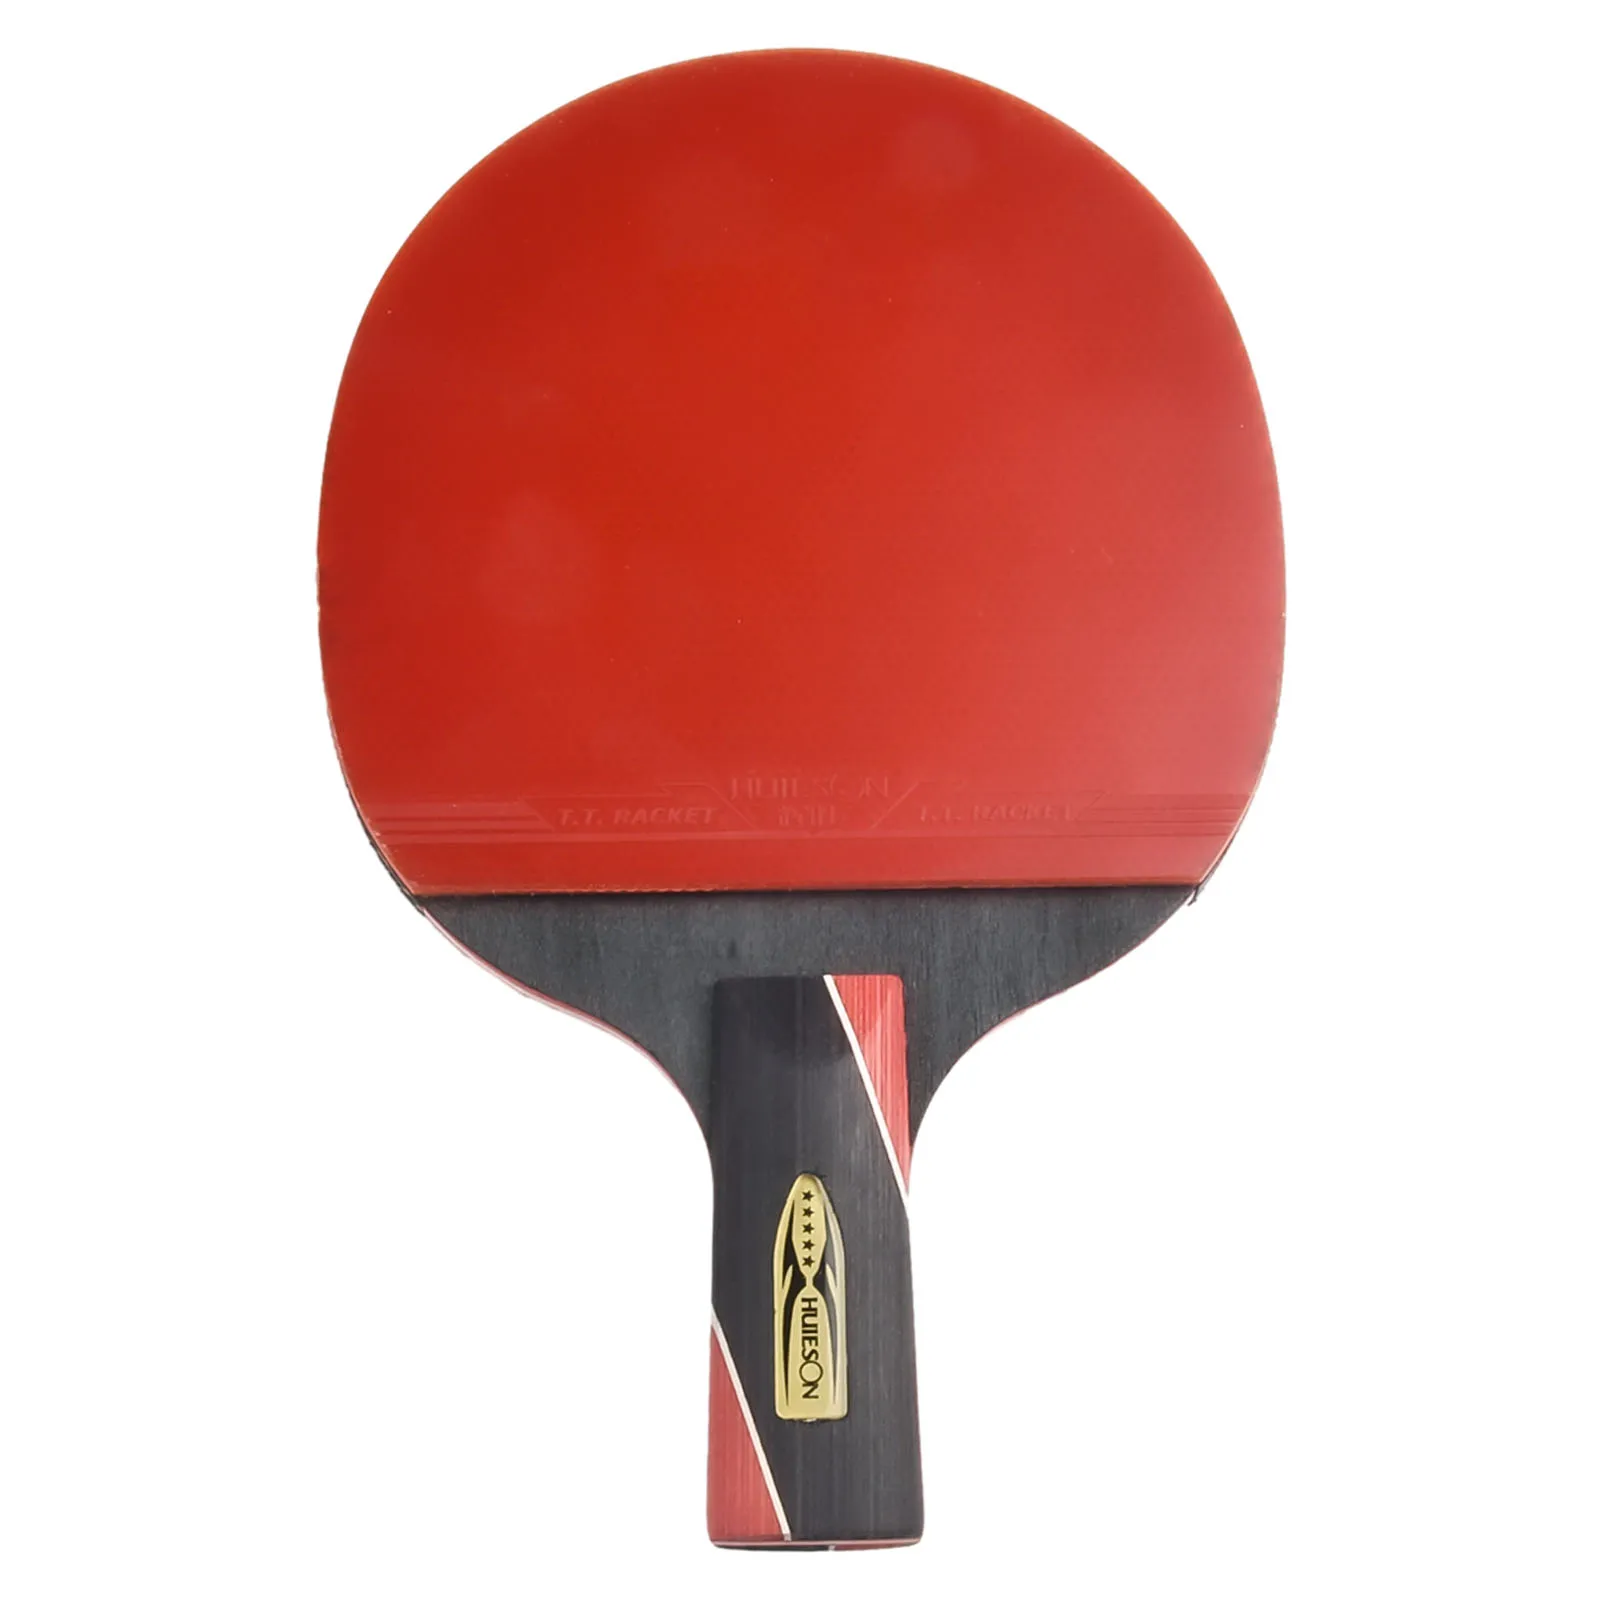 

Racket Case Ping Pong Paddle Paddle Ping Pong Professional Racket Single Stability Table Tennis Training Carbon Fiber+Rubber